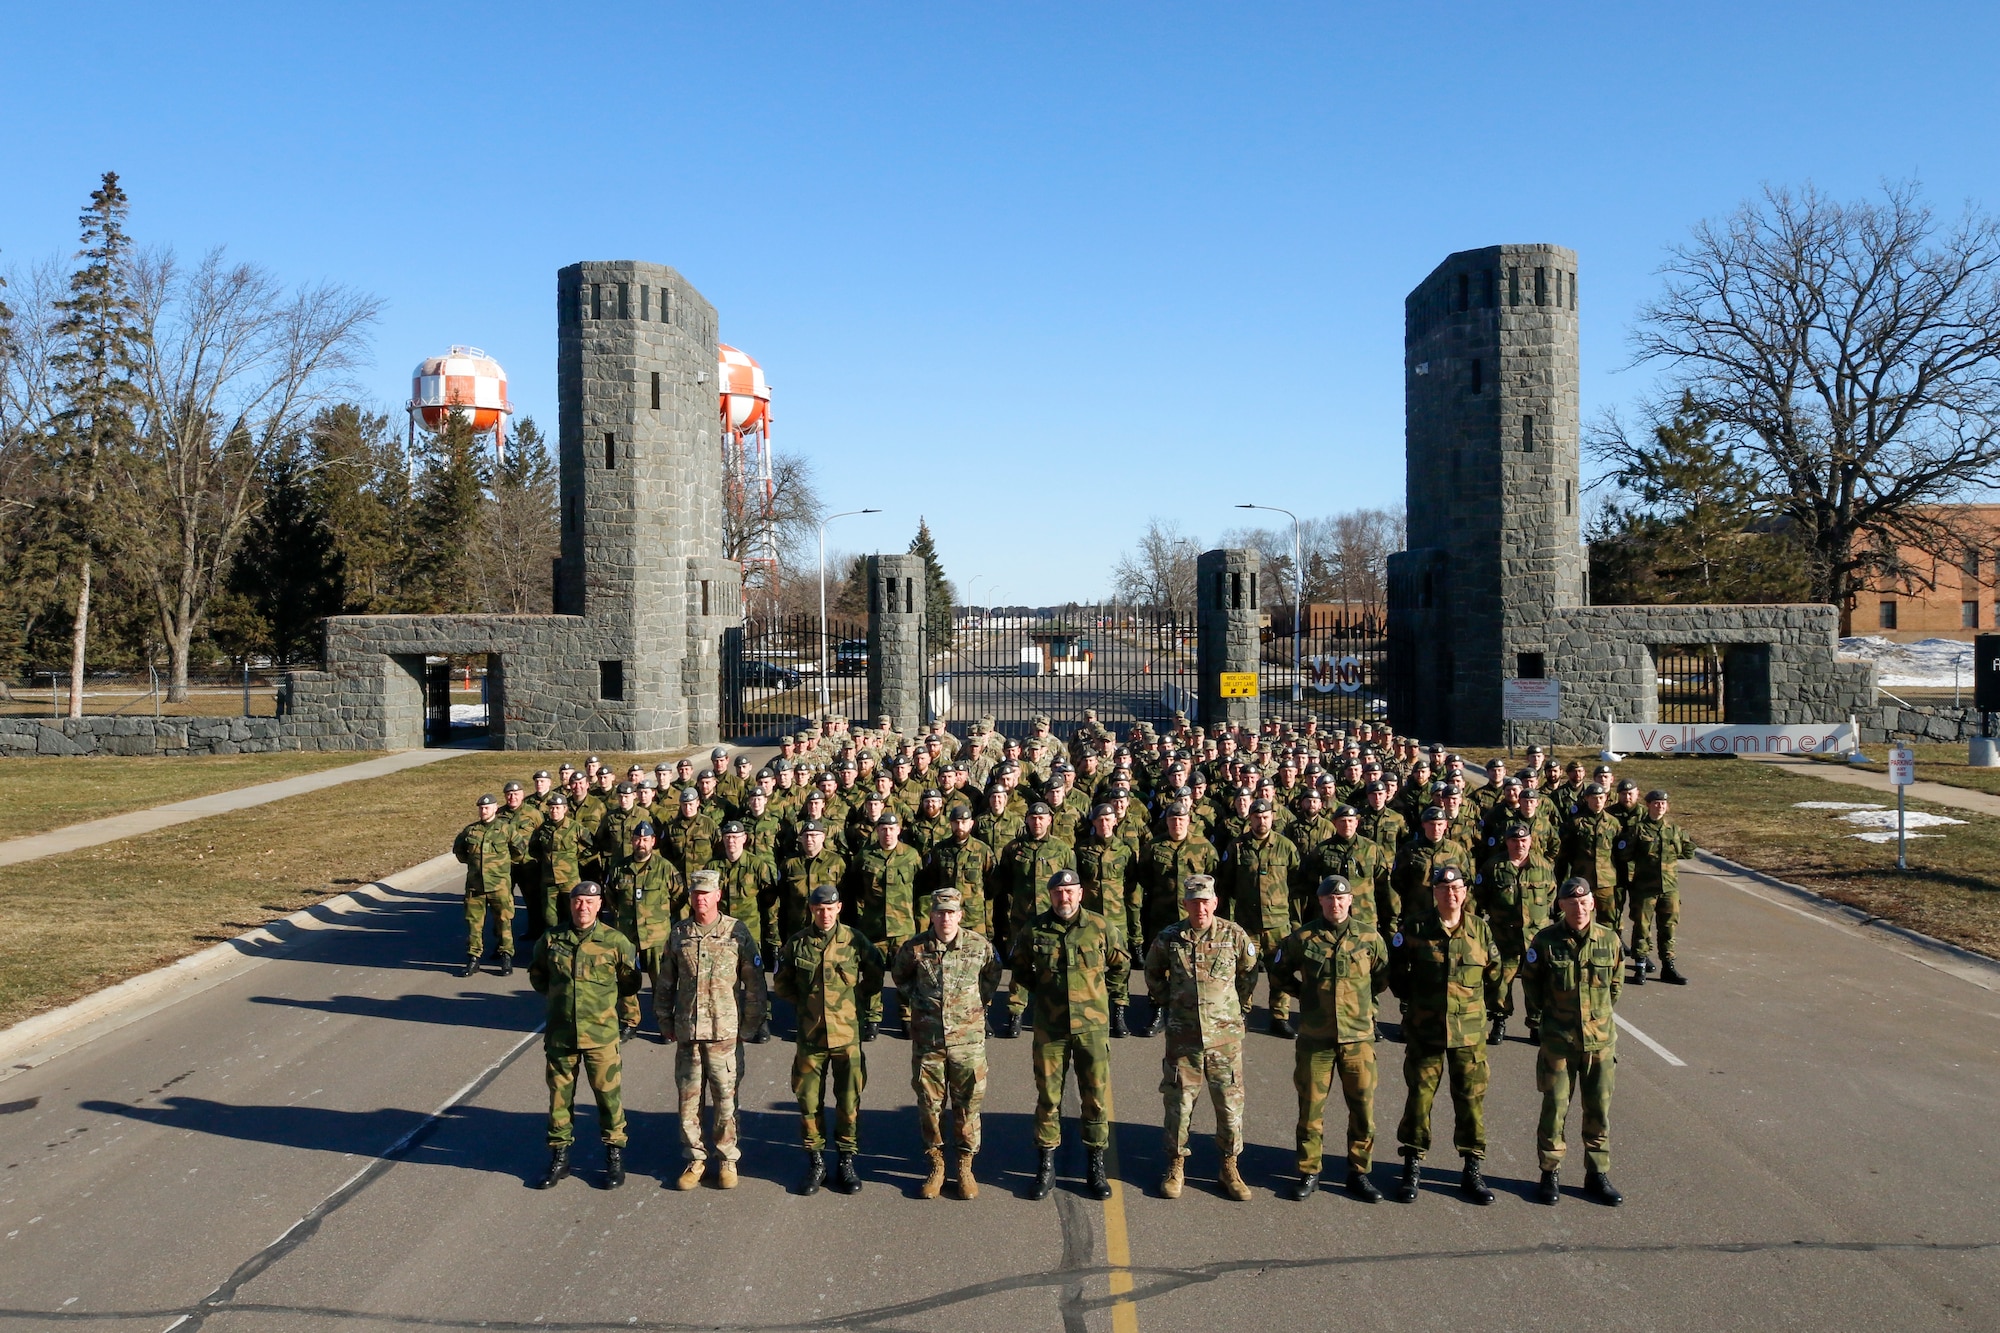 Minnesota National Guard Soldiers and service members from the Norwegian military’s Home Guard in front of the main gate at Camp Ripley, Minnesota, March 26, 2022, after the start of the the 49th Annual Norwegian Exchange. The partnership develops relationships between international allies through training exercises in Minnesota and Norway.